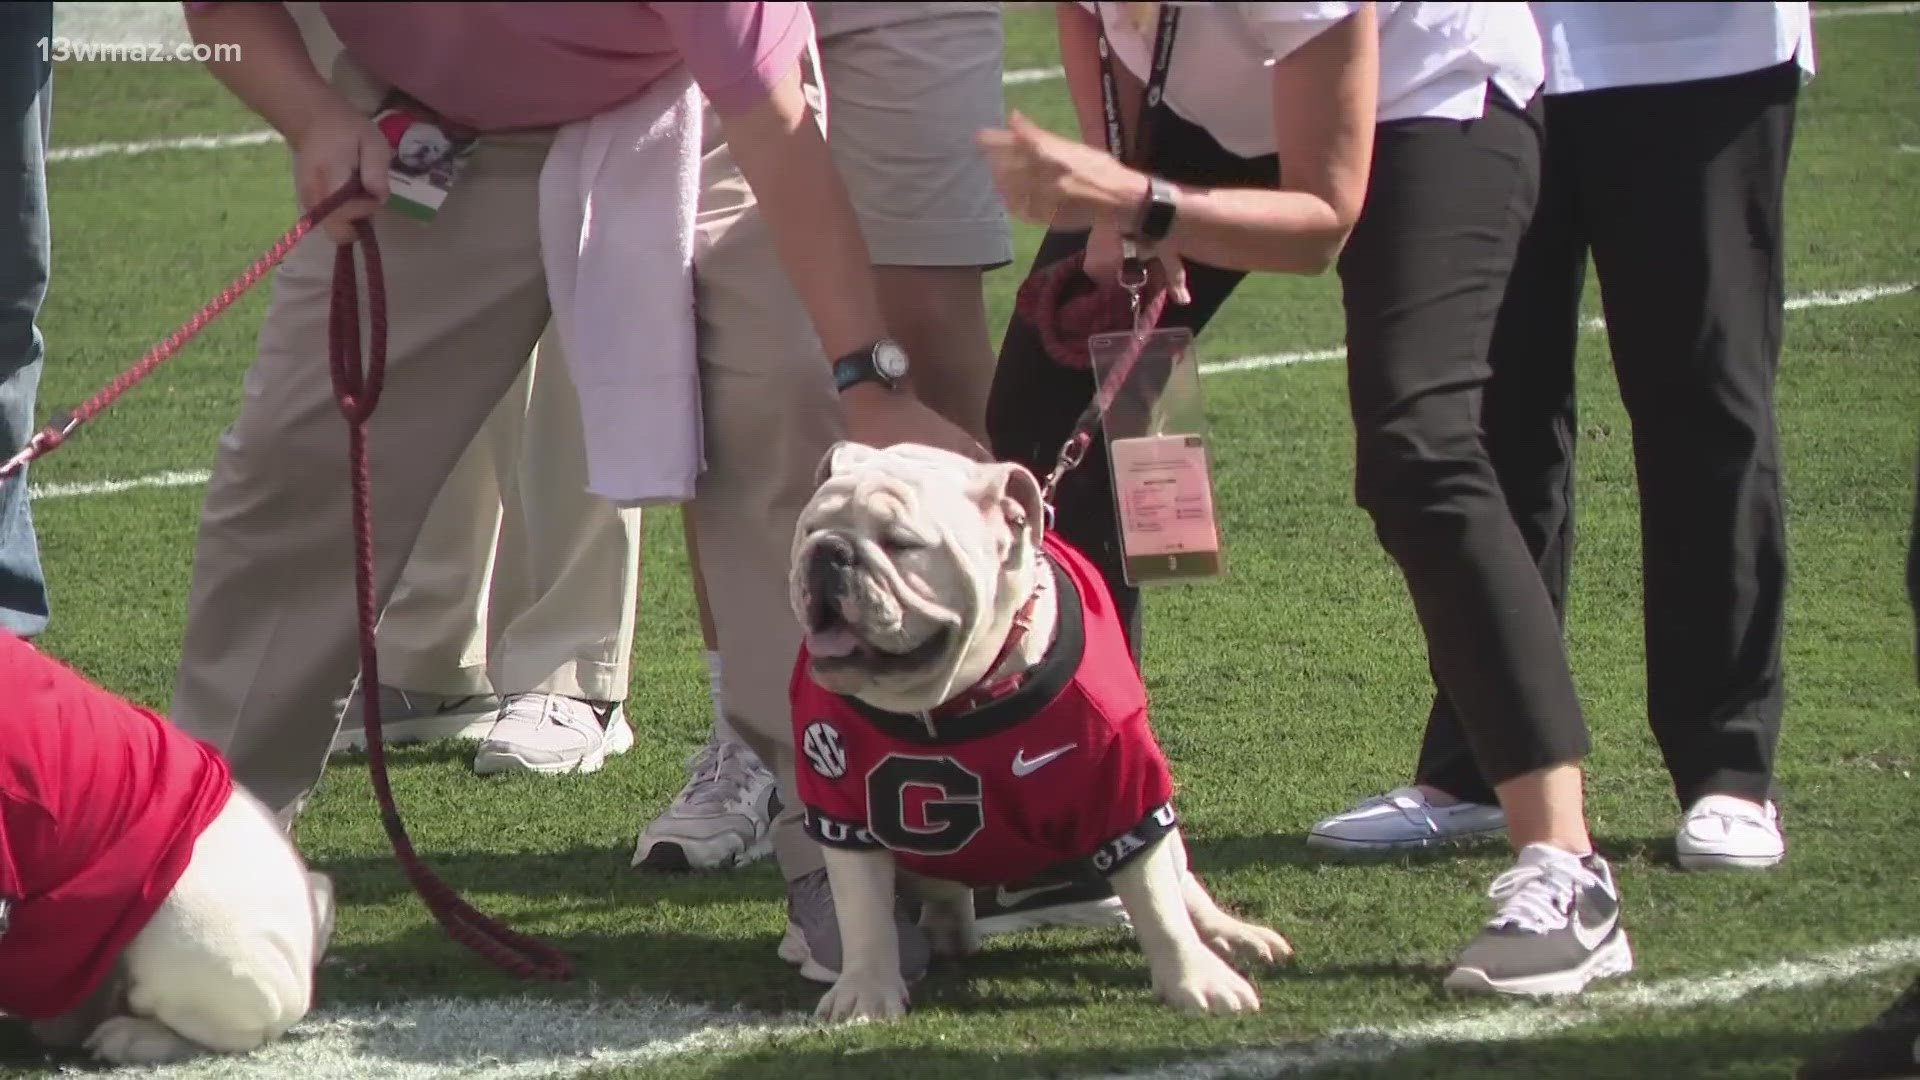 UGA held a collaring ceremony on Saturday during the annual G-Day game.